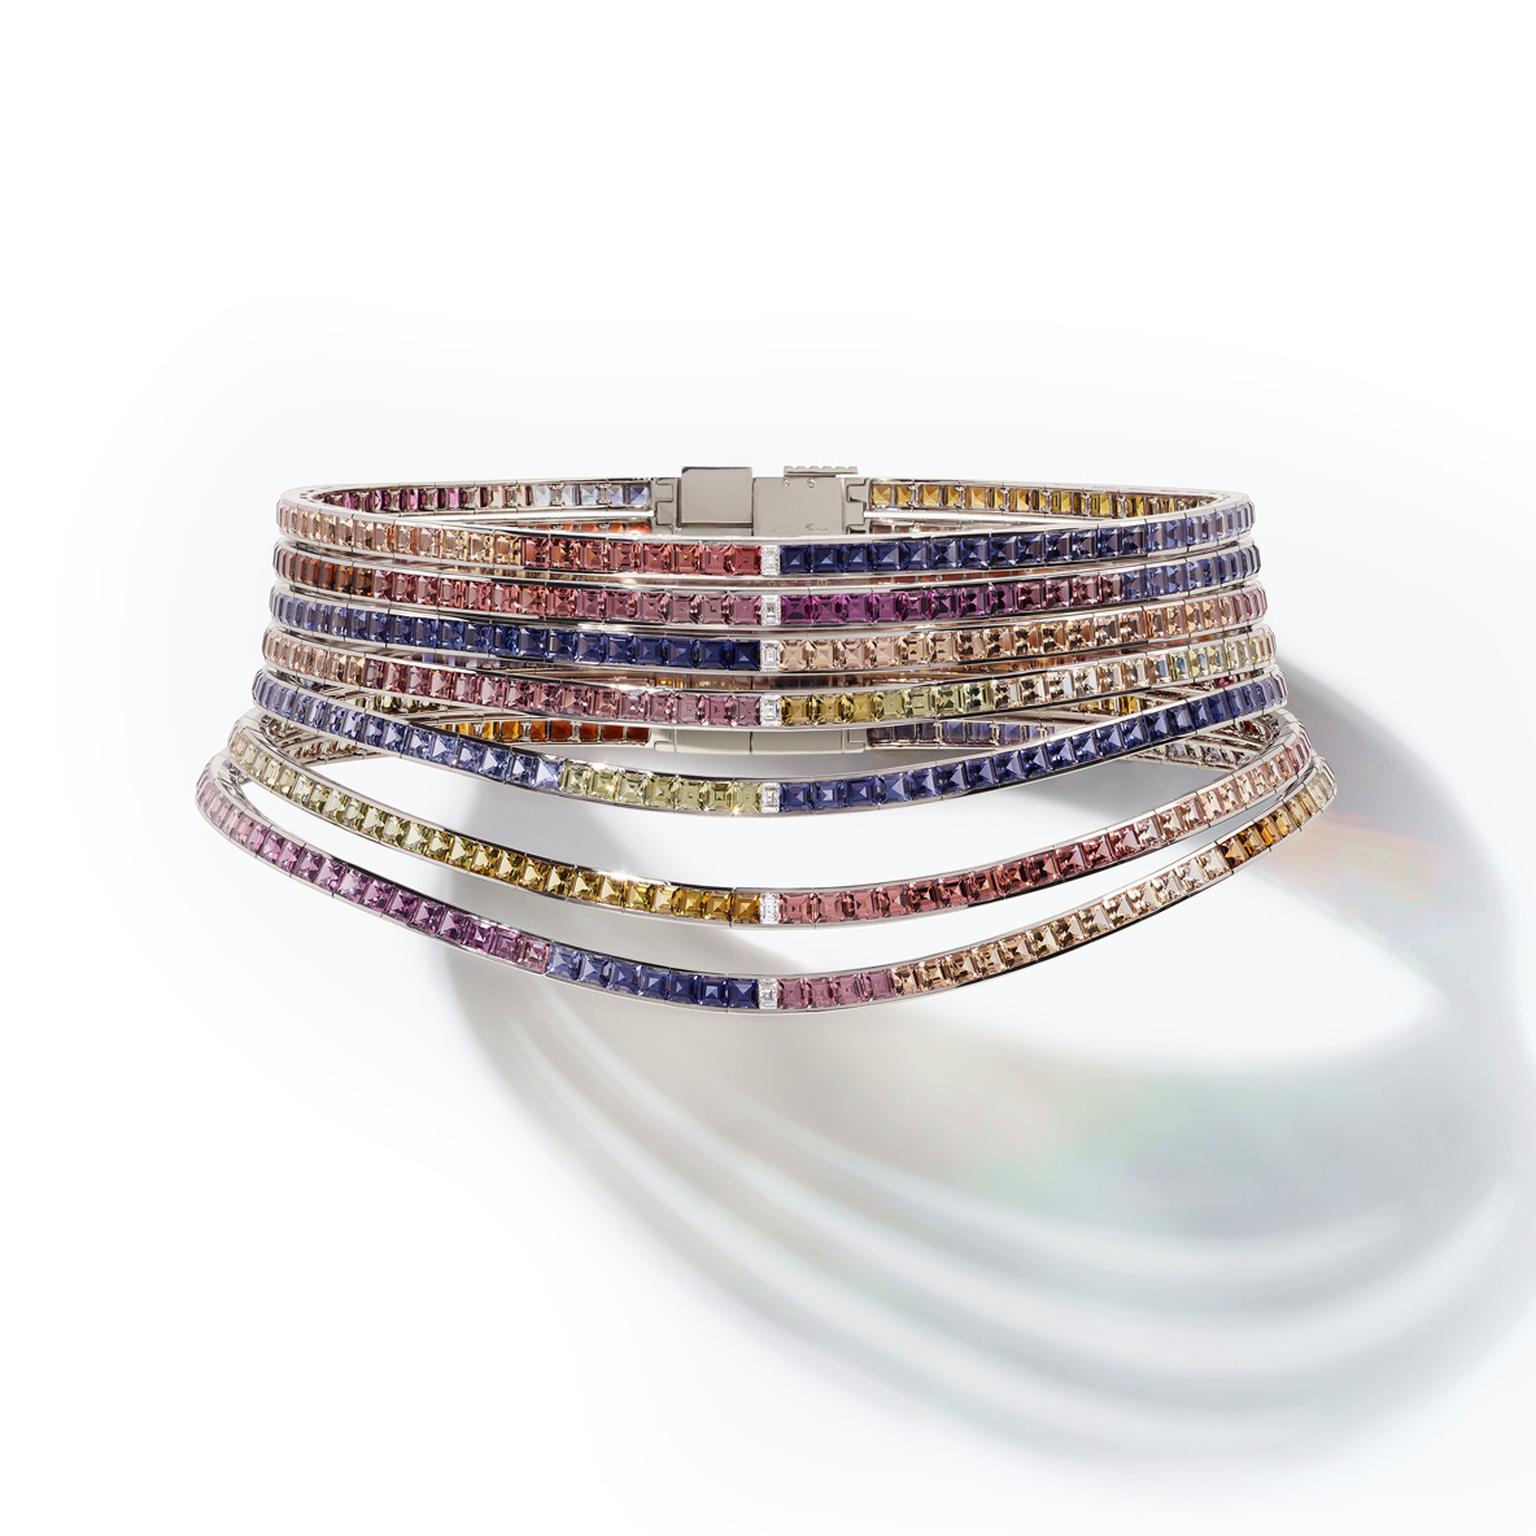 Hermès Feux du Ciel coloured gemstone choker from the HB-IV Continuum collection